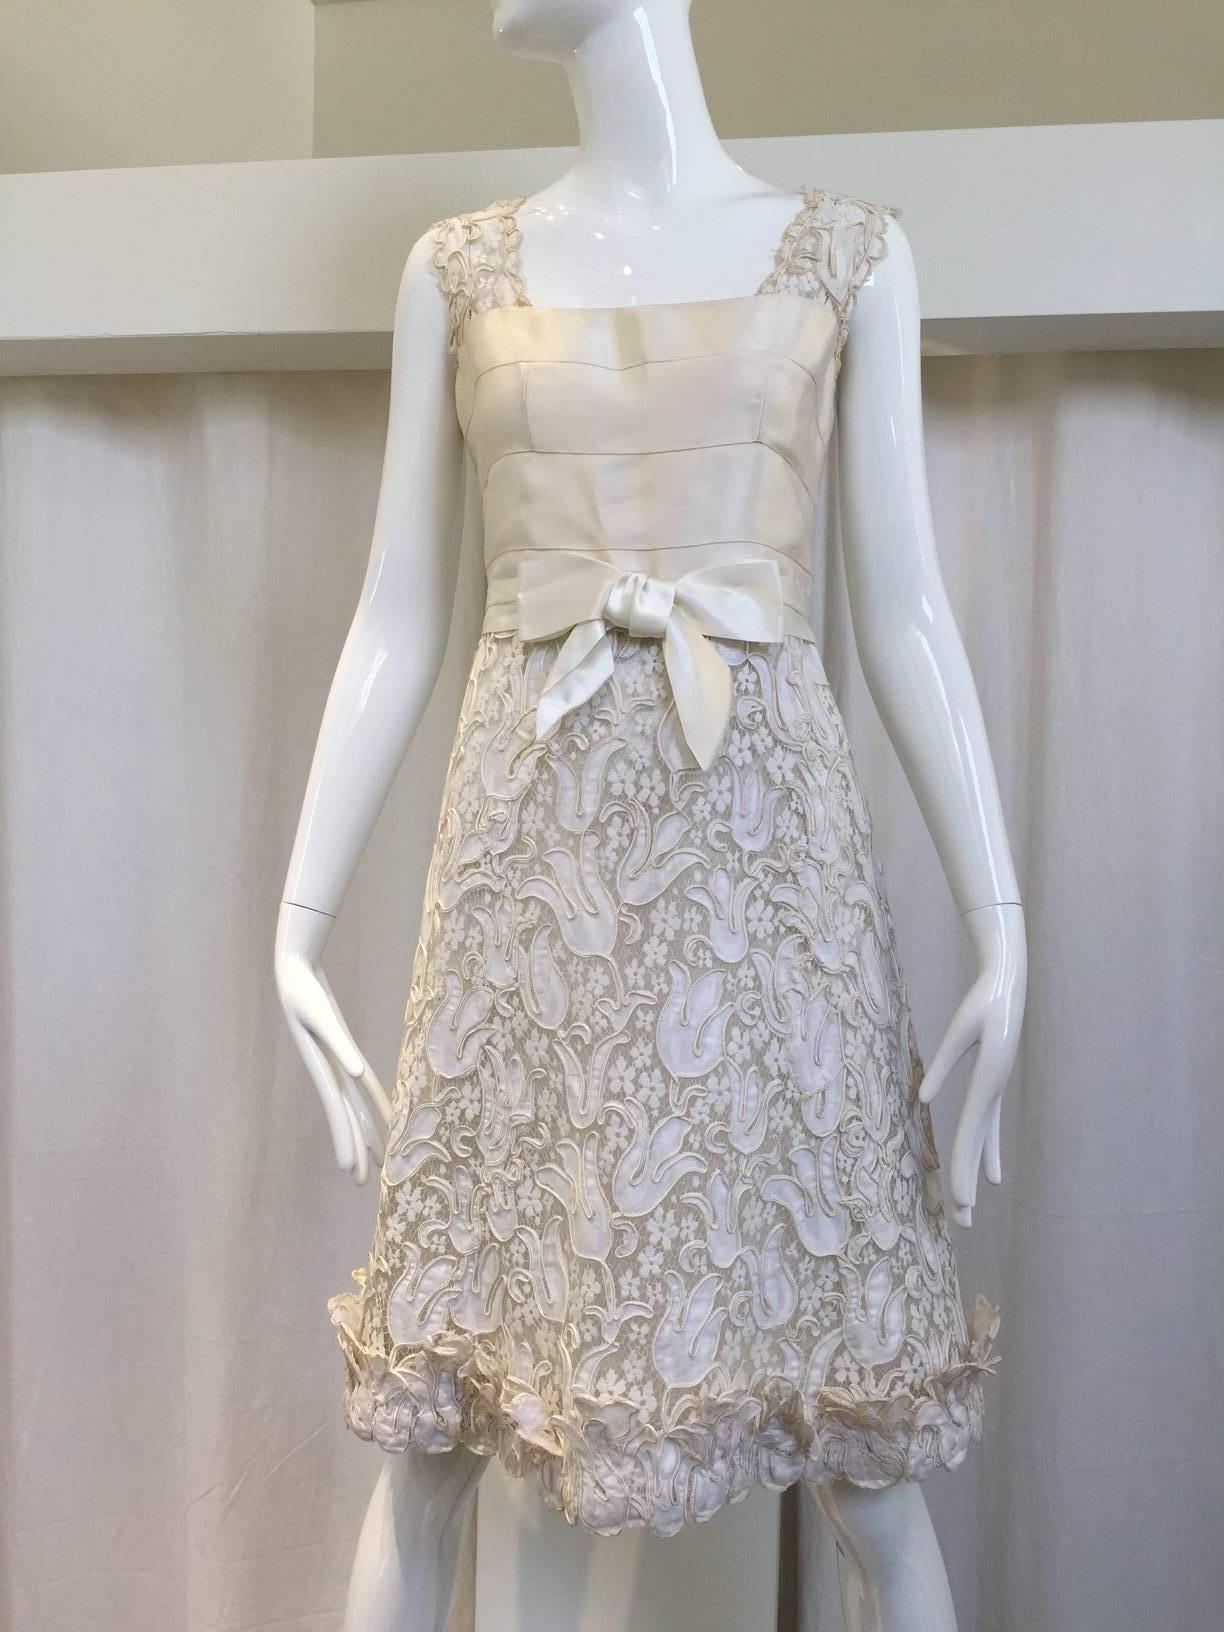 This exceptionally detailed ensemble is made of DARQUER lace custom designed for CHANEL . DARQUER is a company in Calais, France that has been producing beautiful artist designed lace since 1840. The tulip designs in the lace are accentuated with